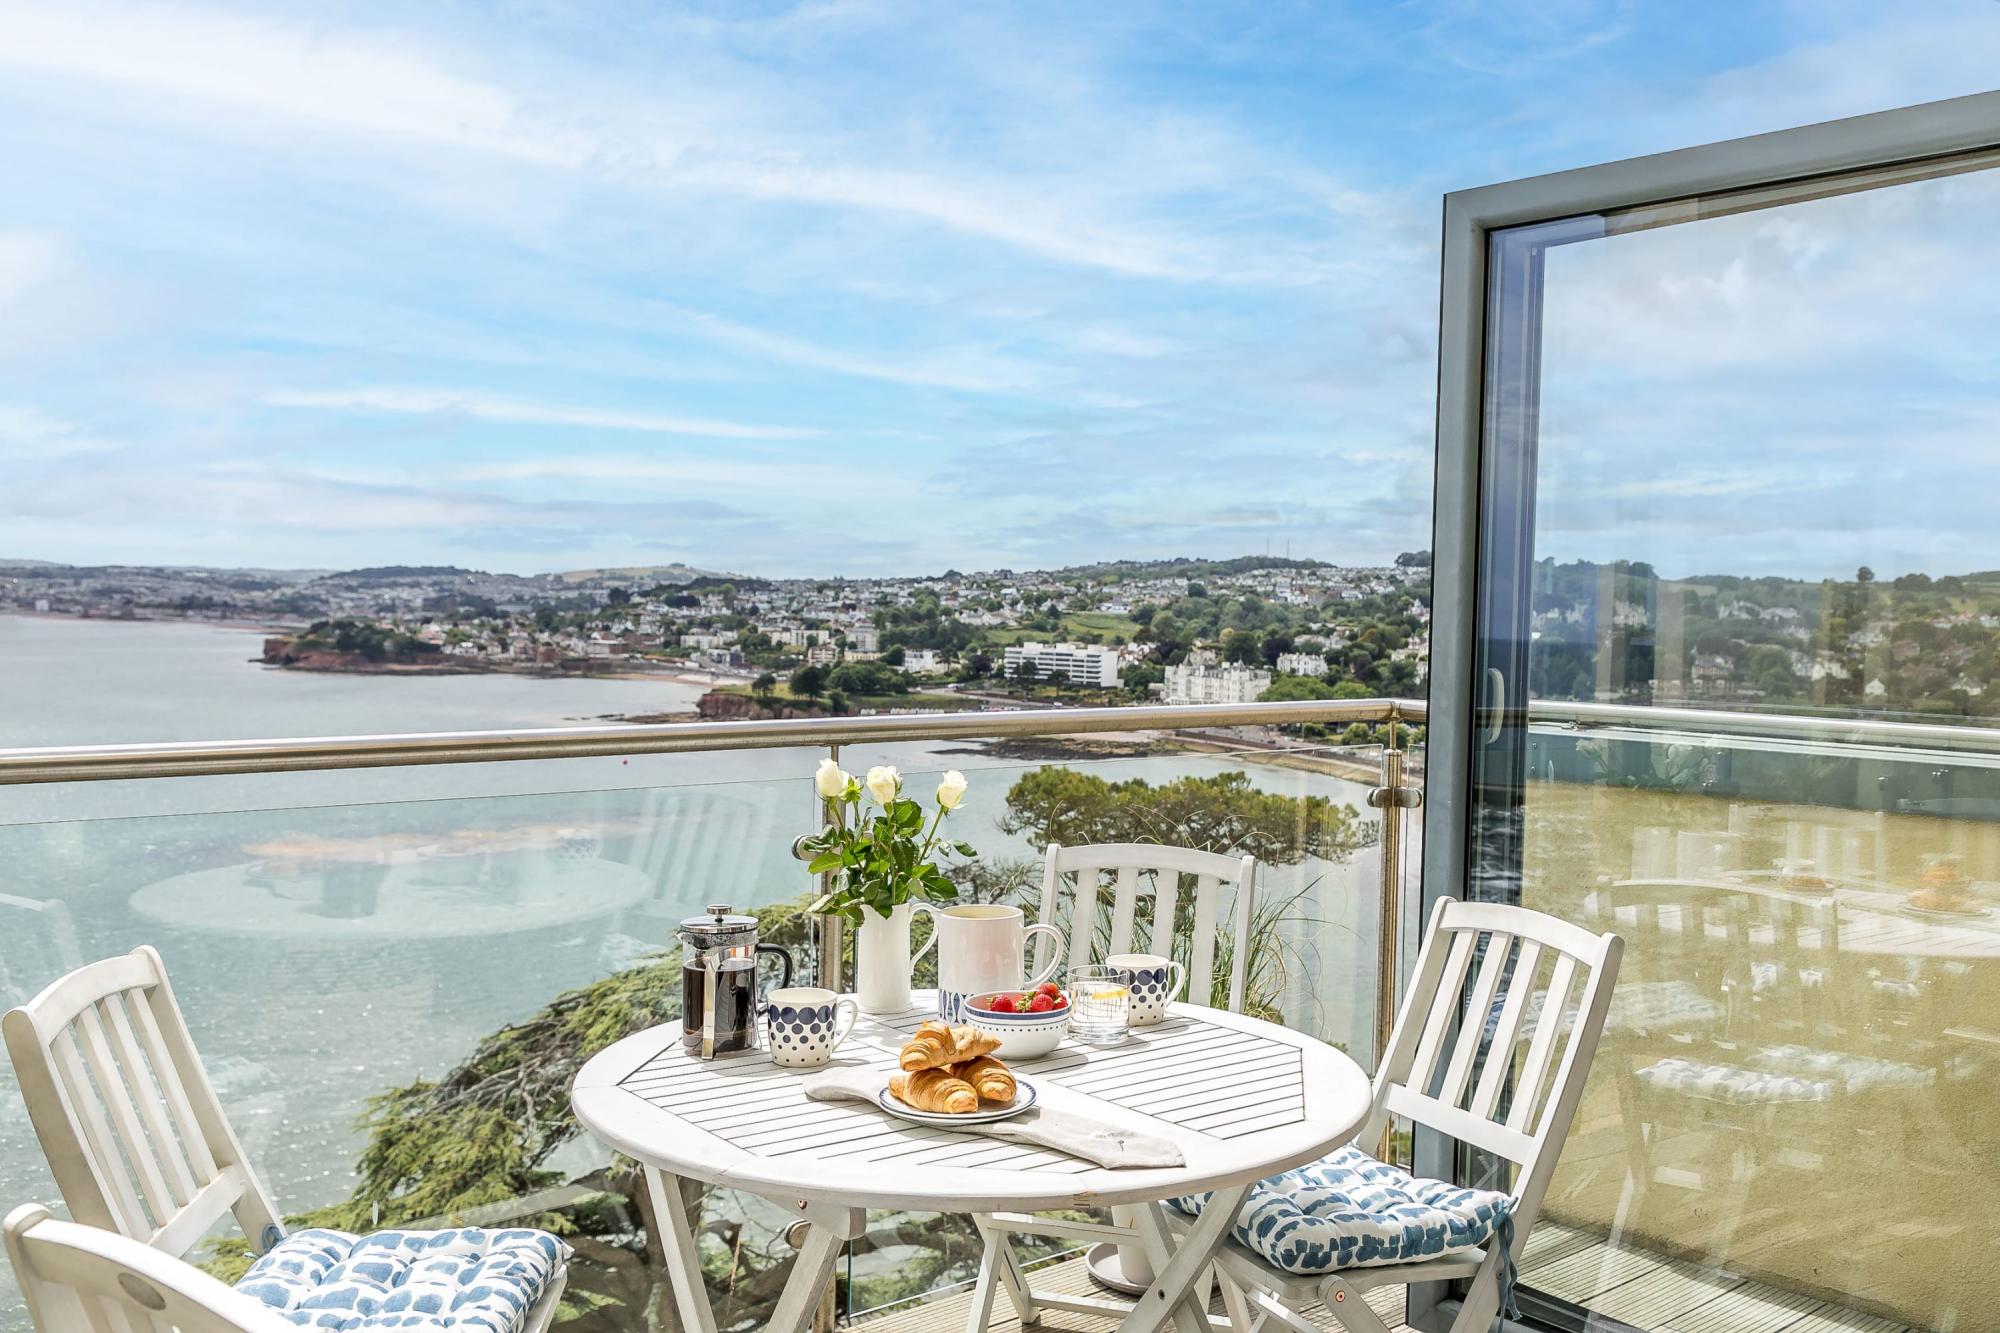 Property Image 1 - A7 Masts - Striking beachside apartment with beautiful sea views  private balcony and secure parking